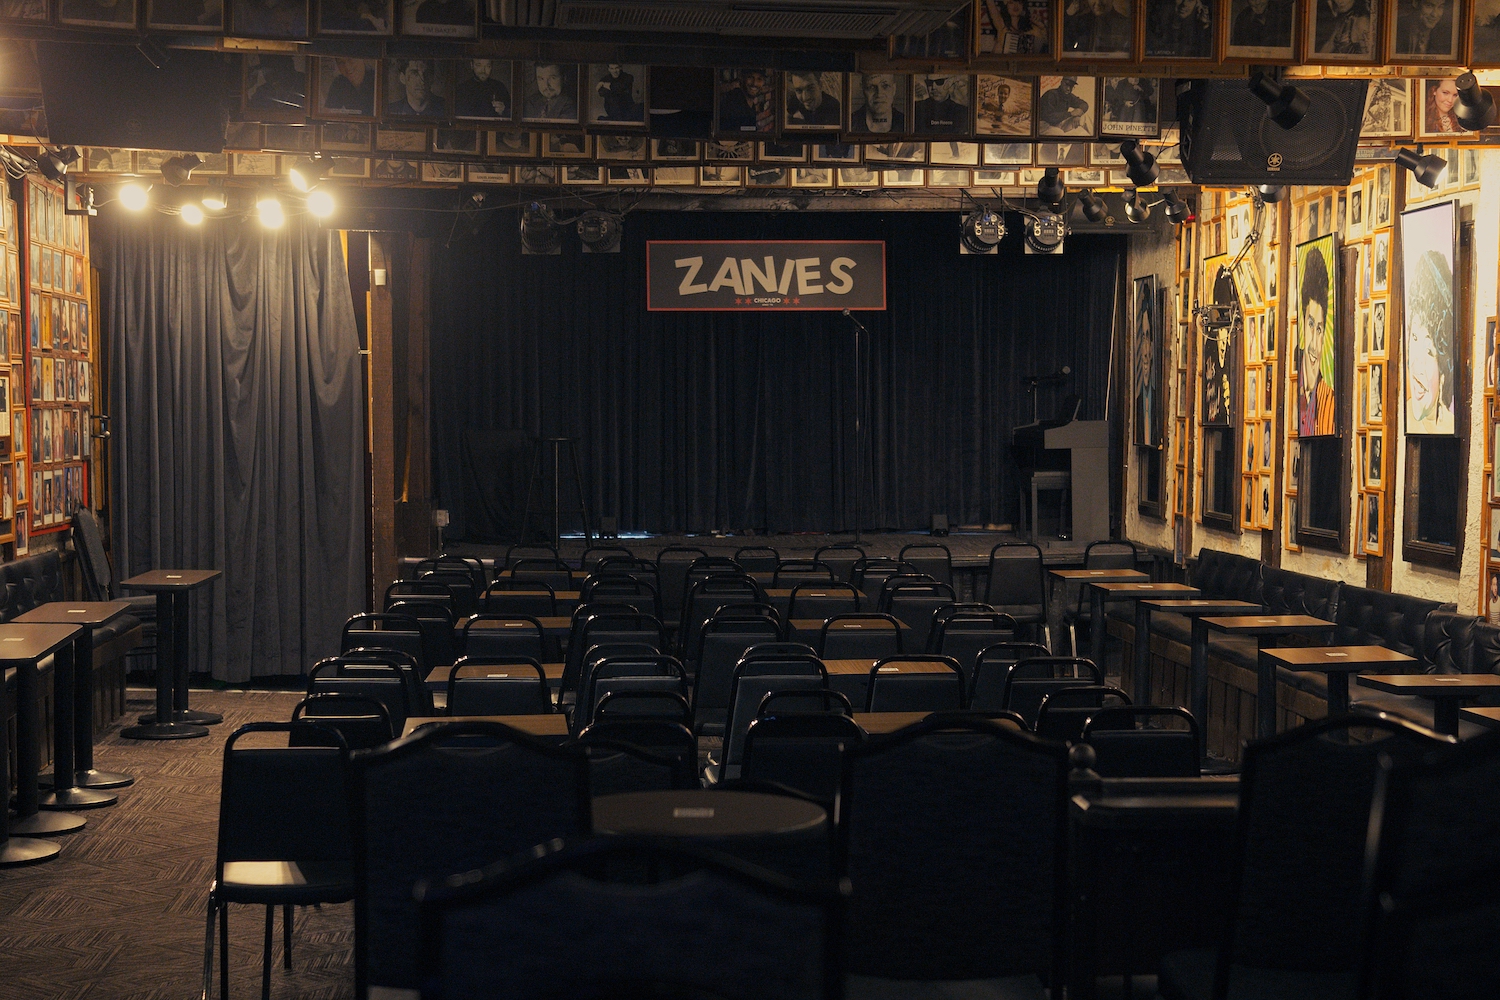 An empty stage with chairs in front of it in a dim room with large posters on the walls.